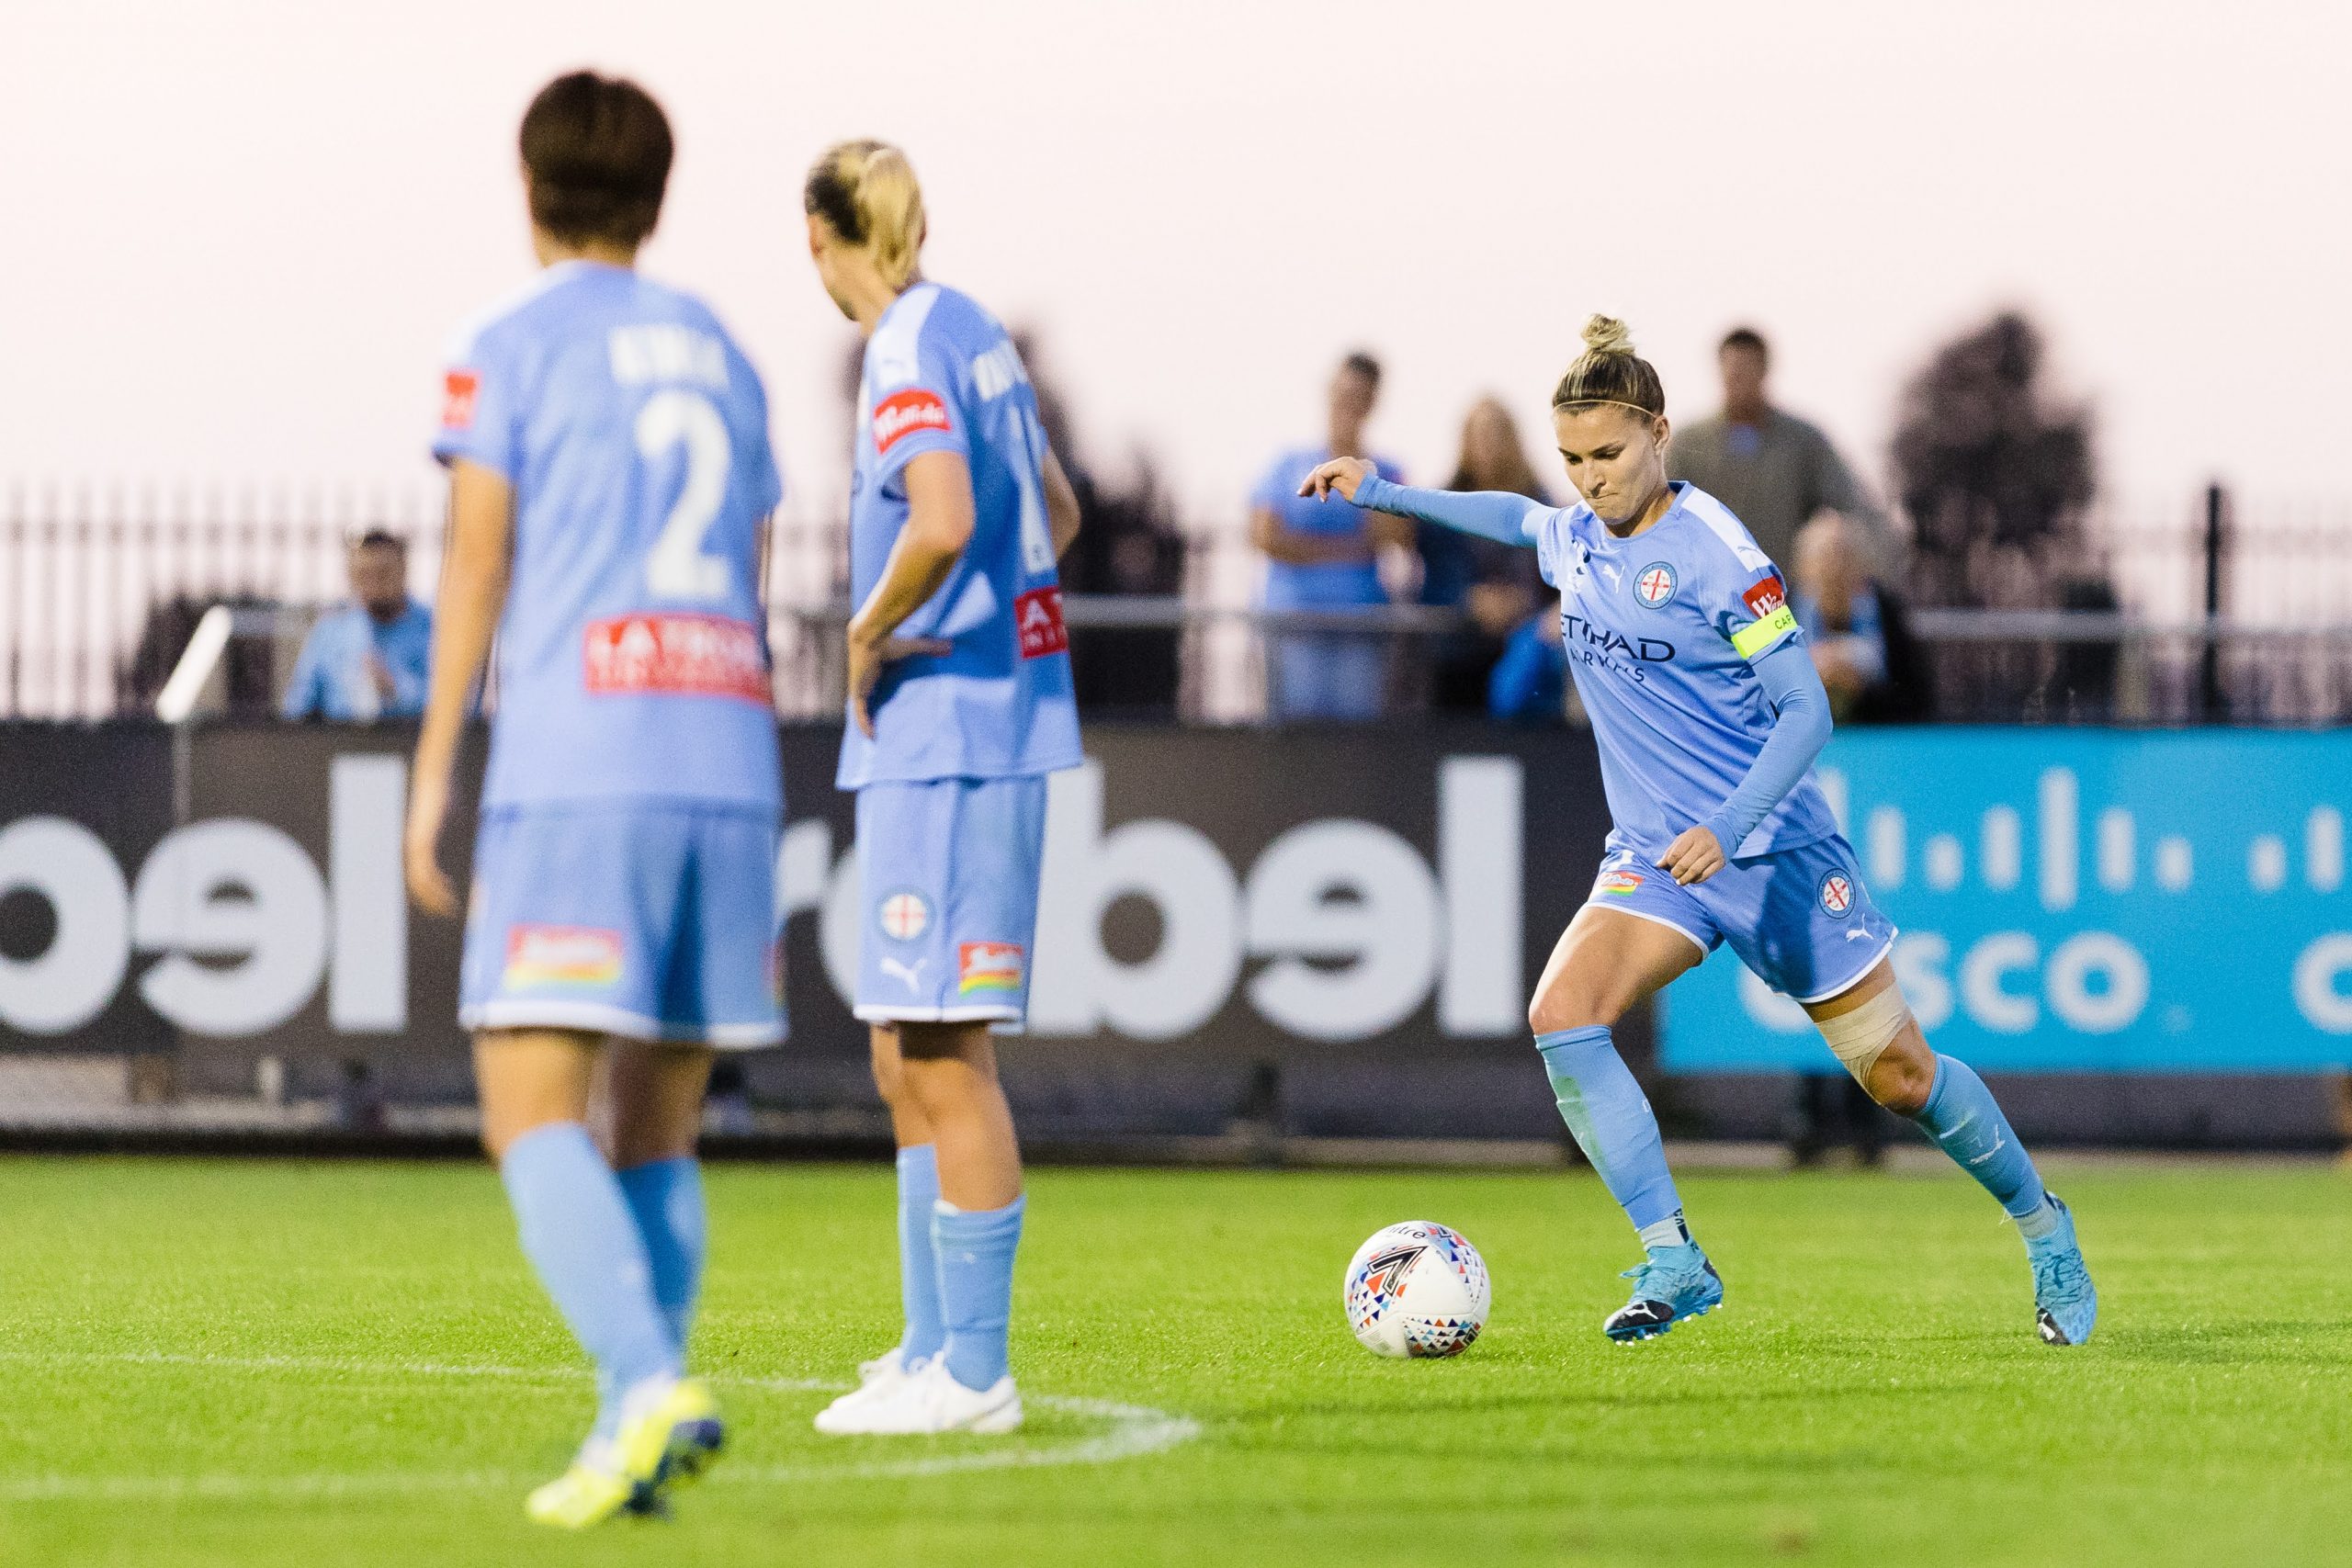 Melbourne City chasing normality